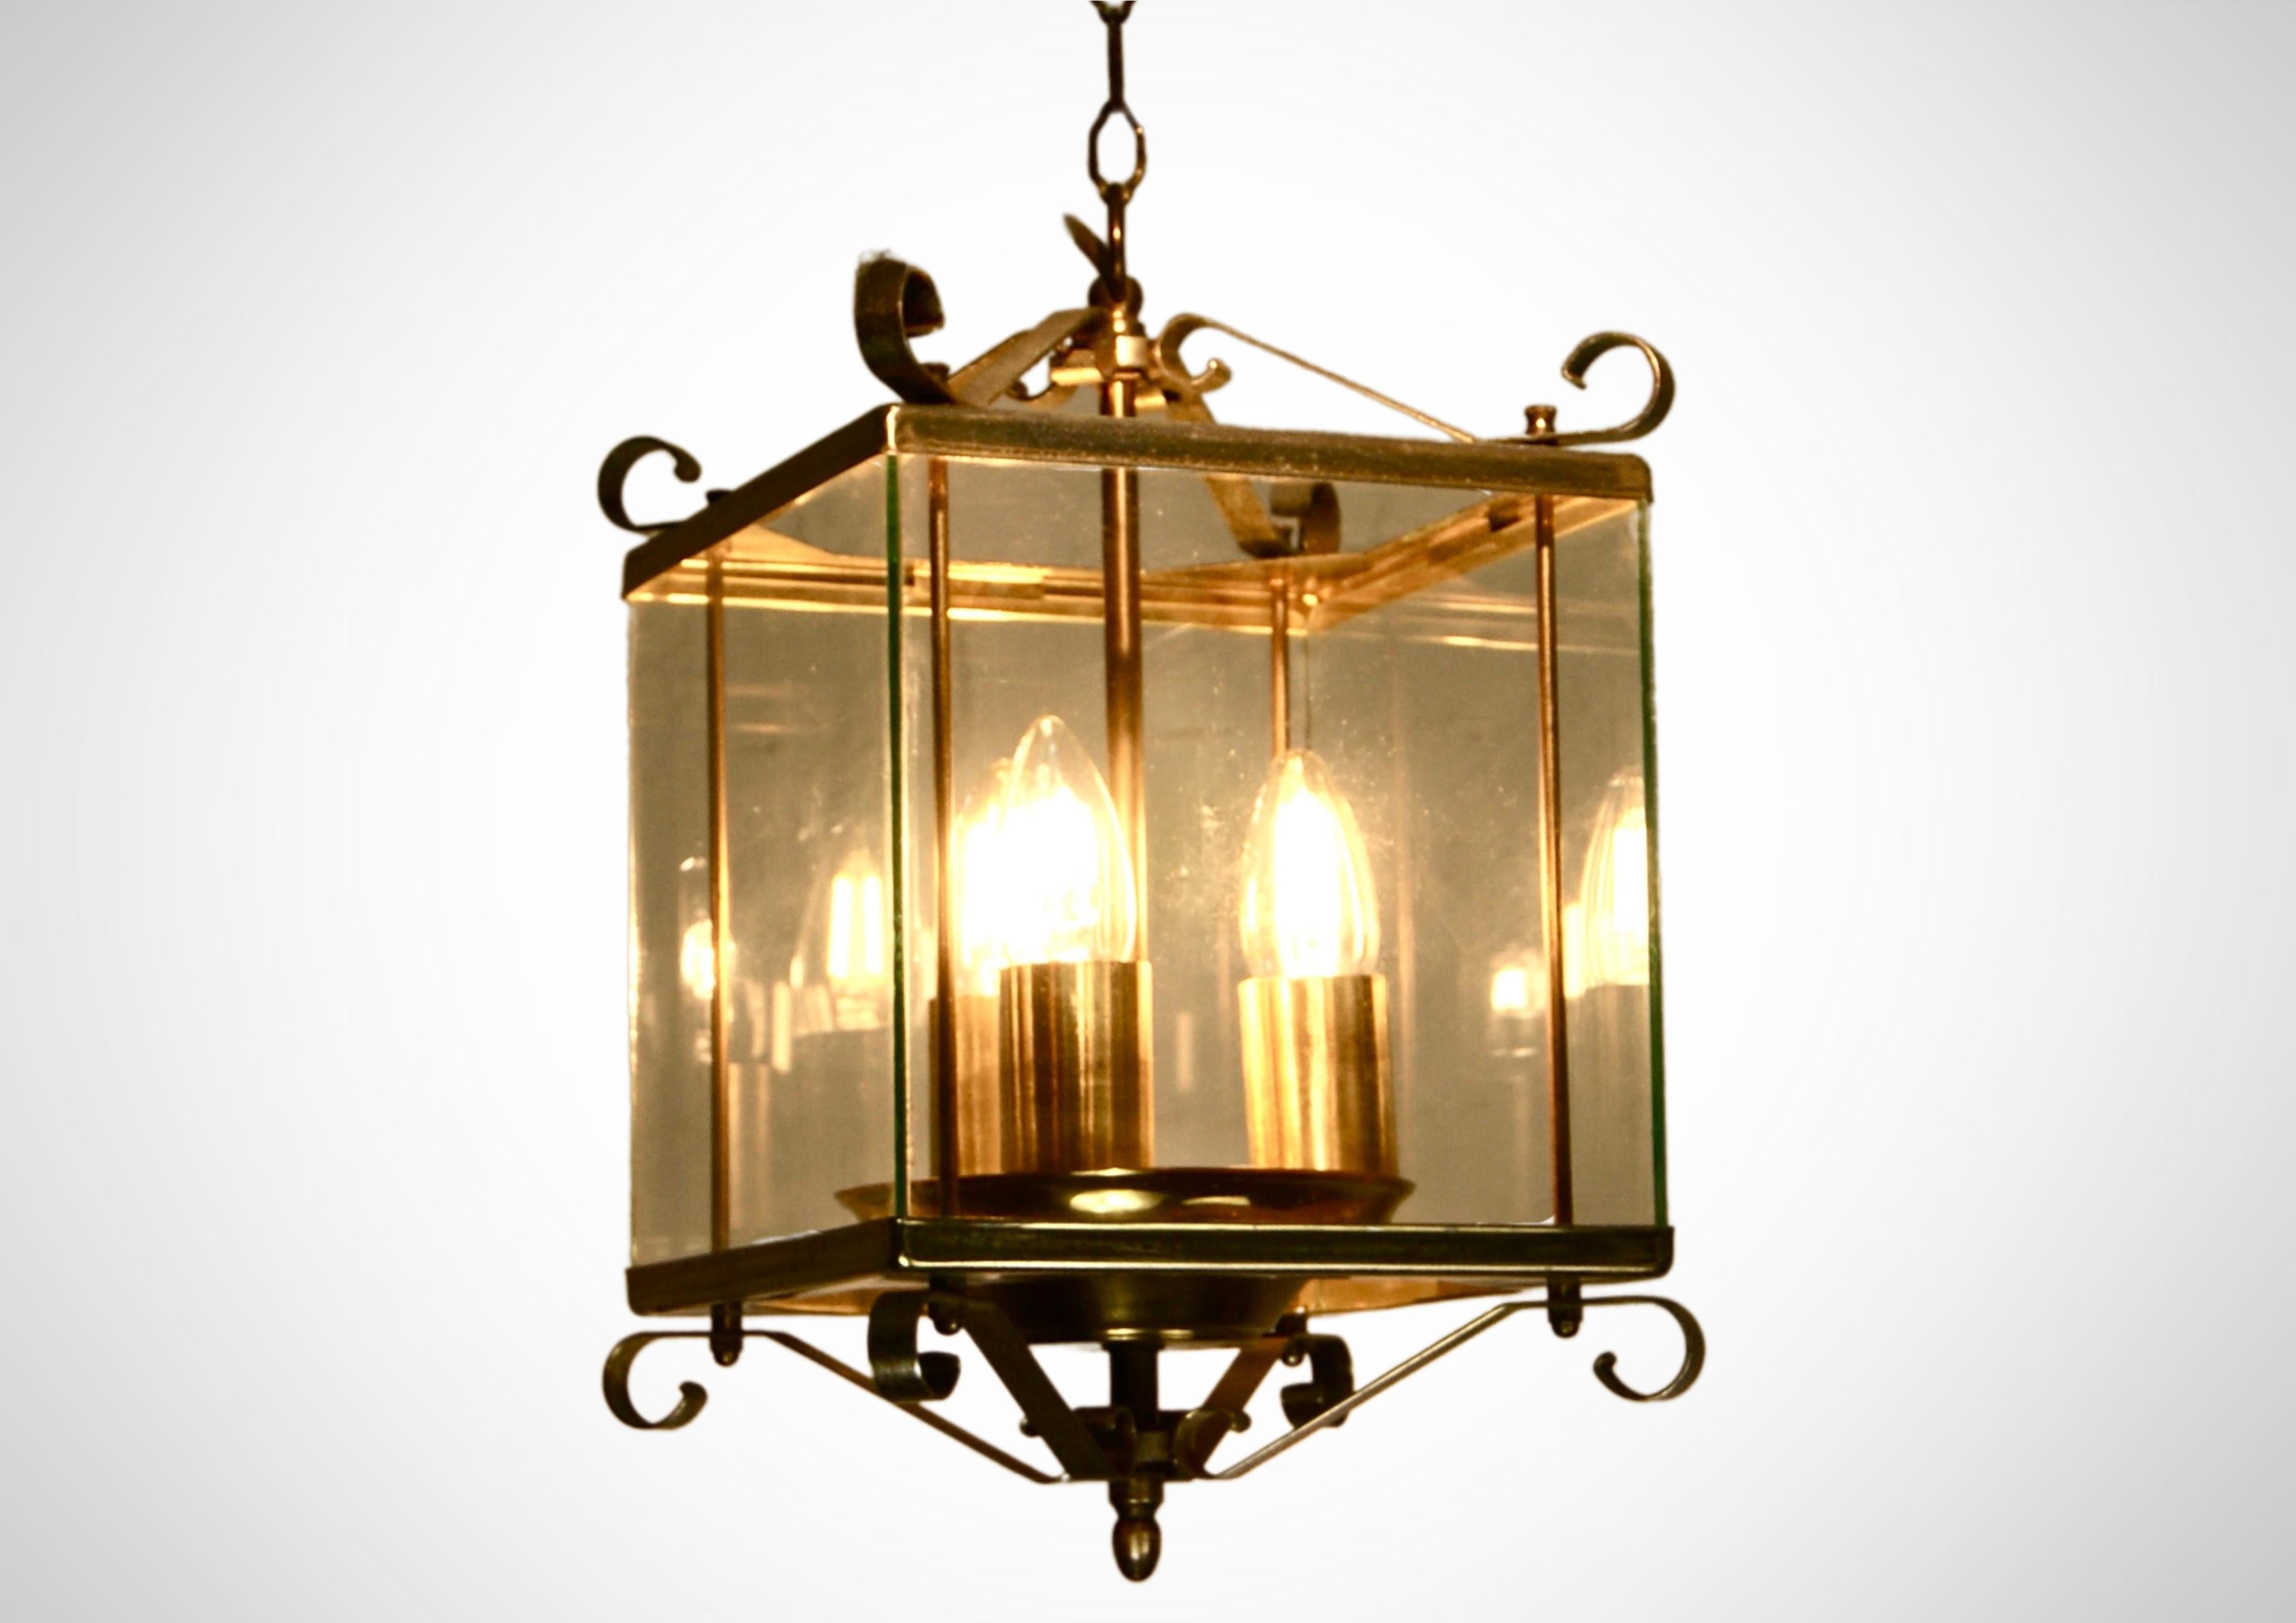 1930s glazed French Lantern. 
Art deco era ceiling suspension ceiling with 3 bulbs.
Gorgeous lantern with enough light to soften any dull room.
Solid brass frame with elegant flouncy scrolled edges and corners.
The chandelier is shaped like a bird's